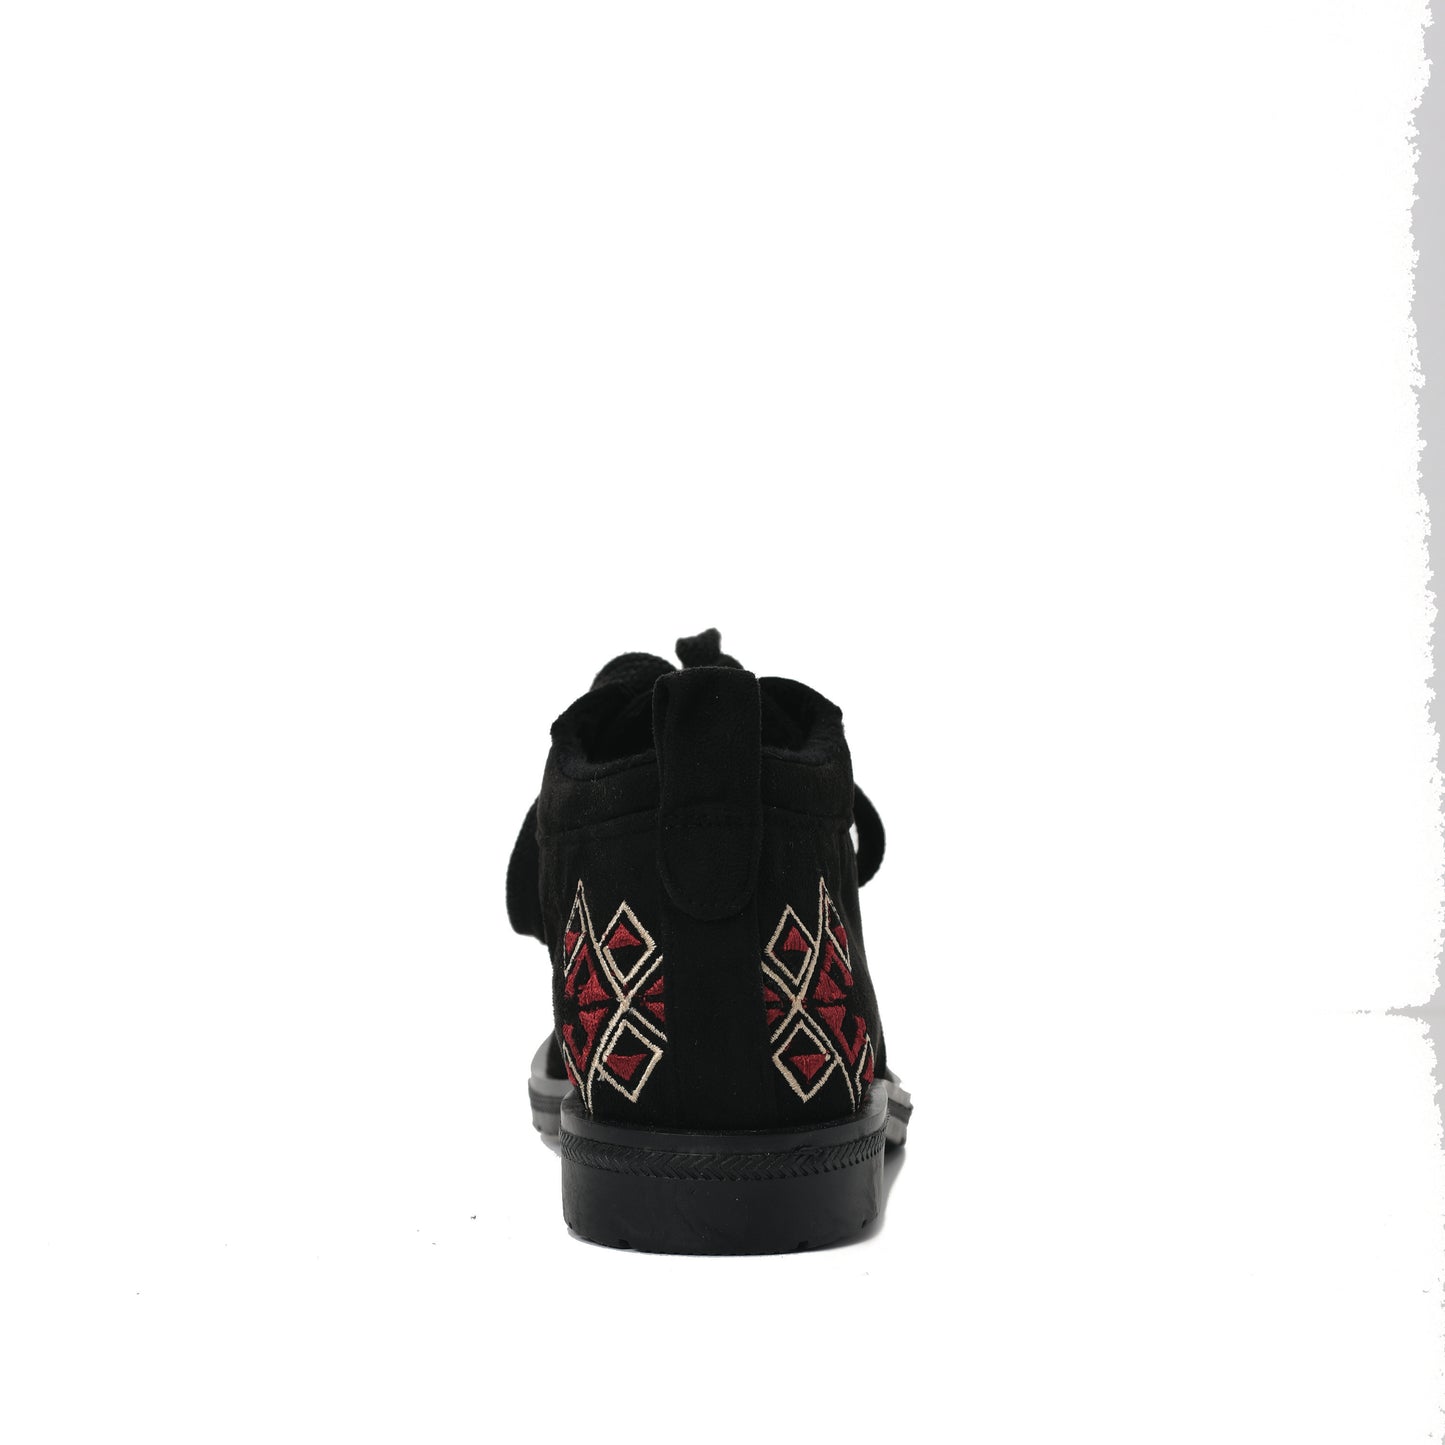 Black thunder embroidered low neck boots